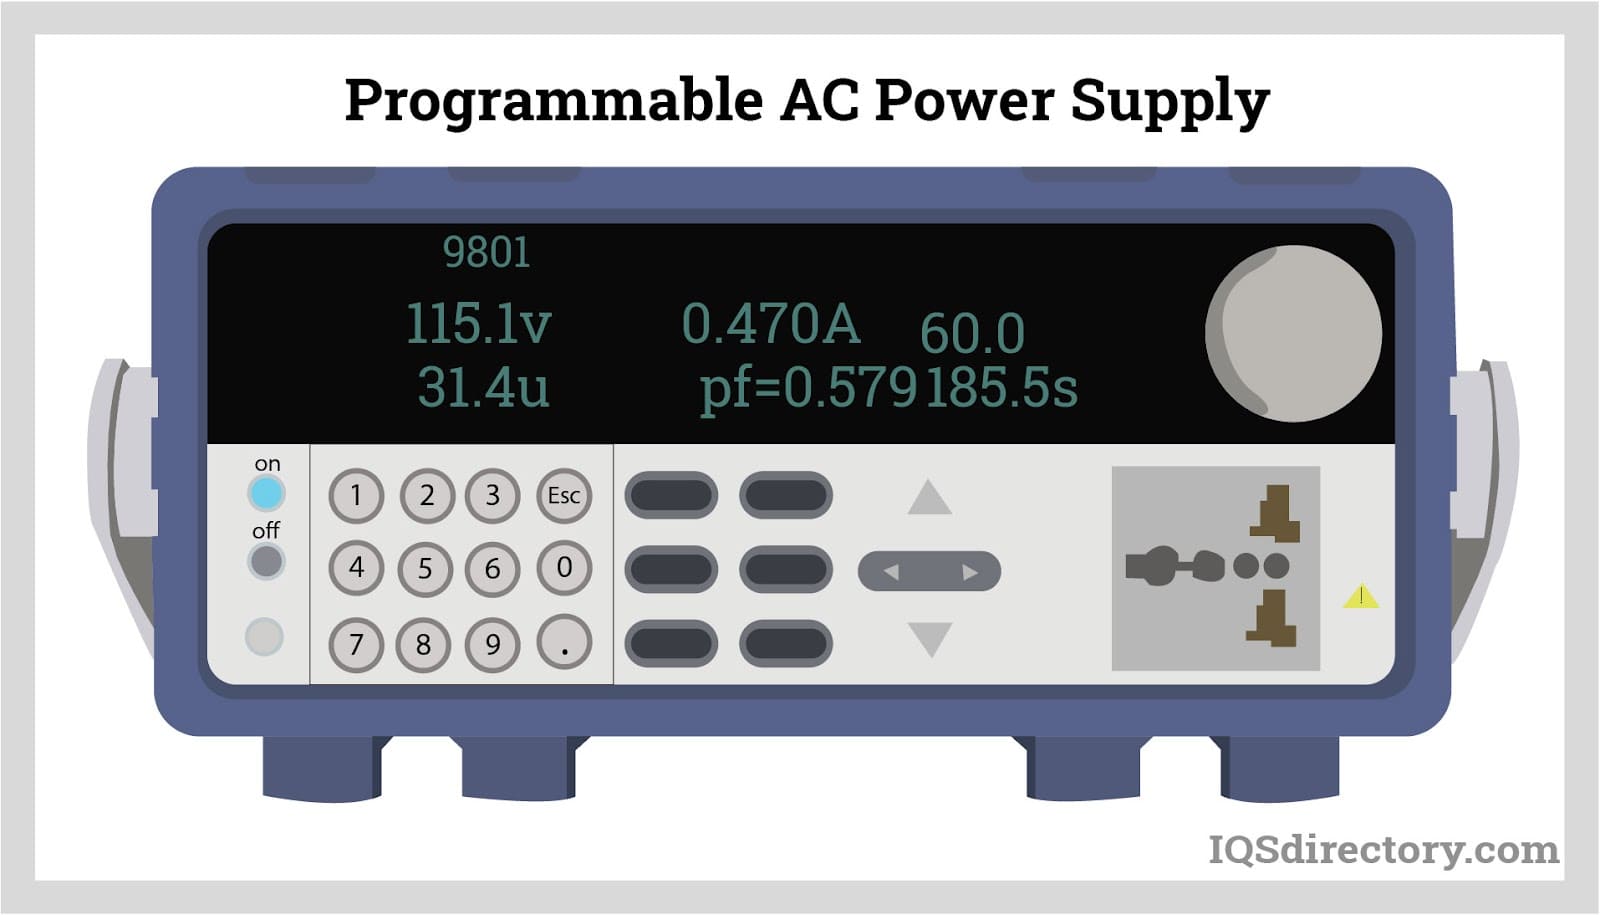 Programmable AC Power Supply